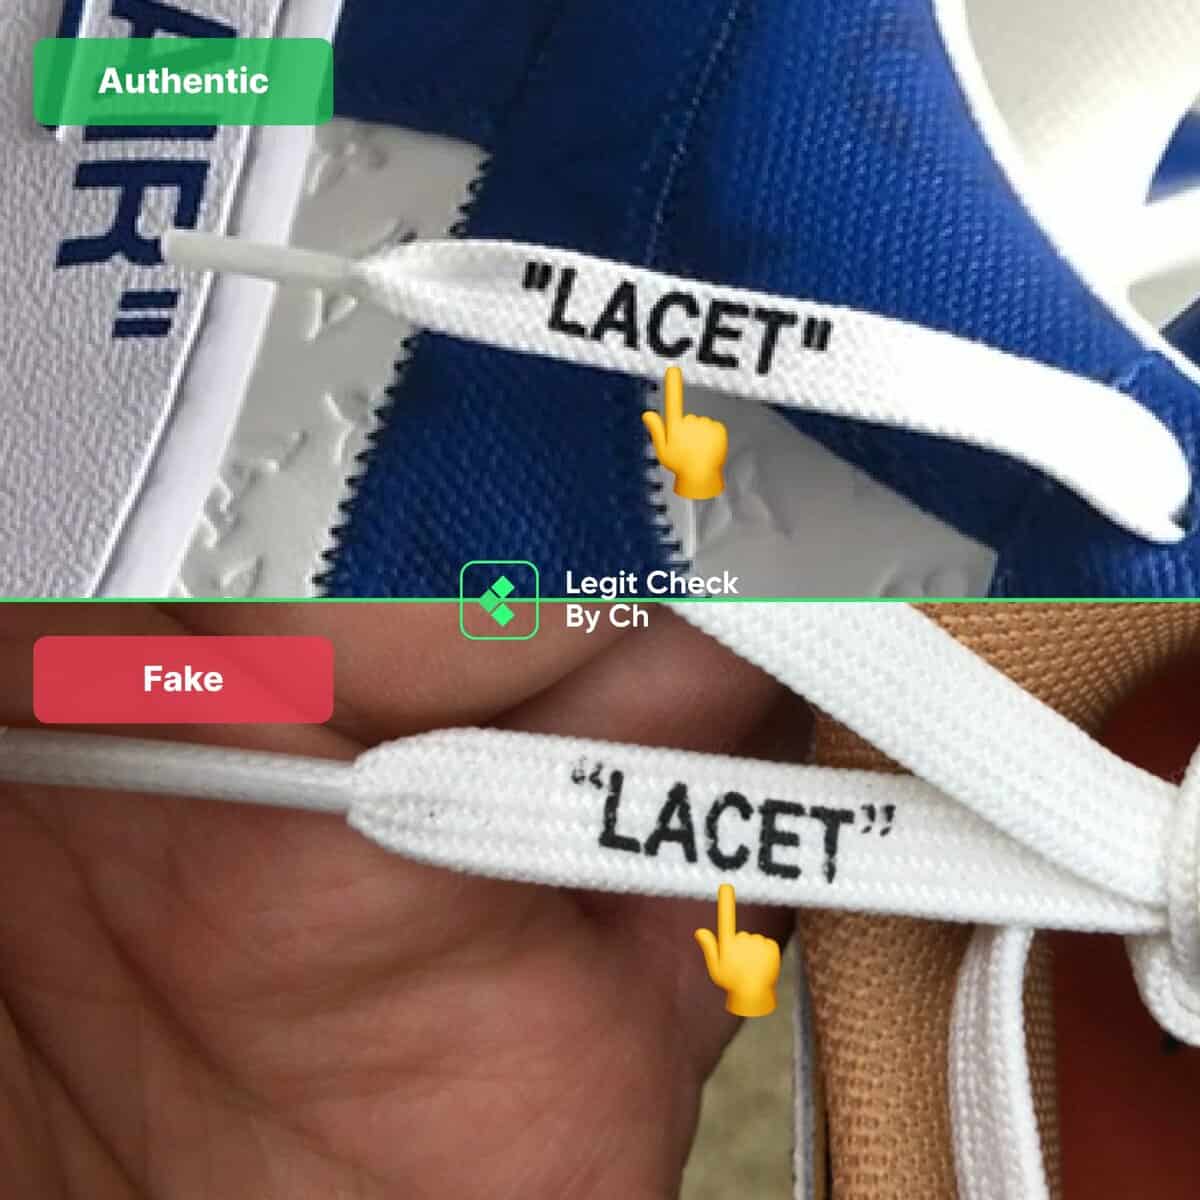 Louis vuitton Airforce 1 from kickzlucas ( see trusted sellers